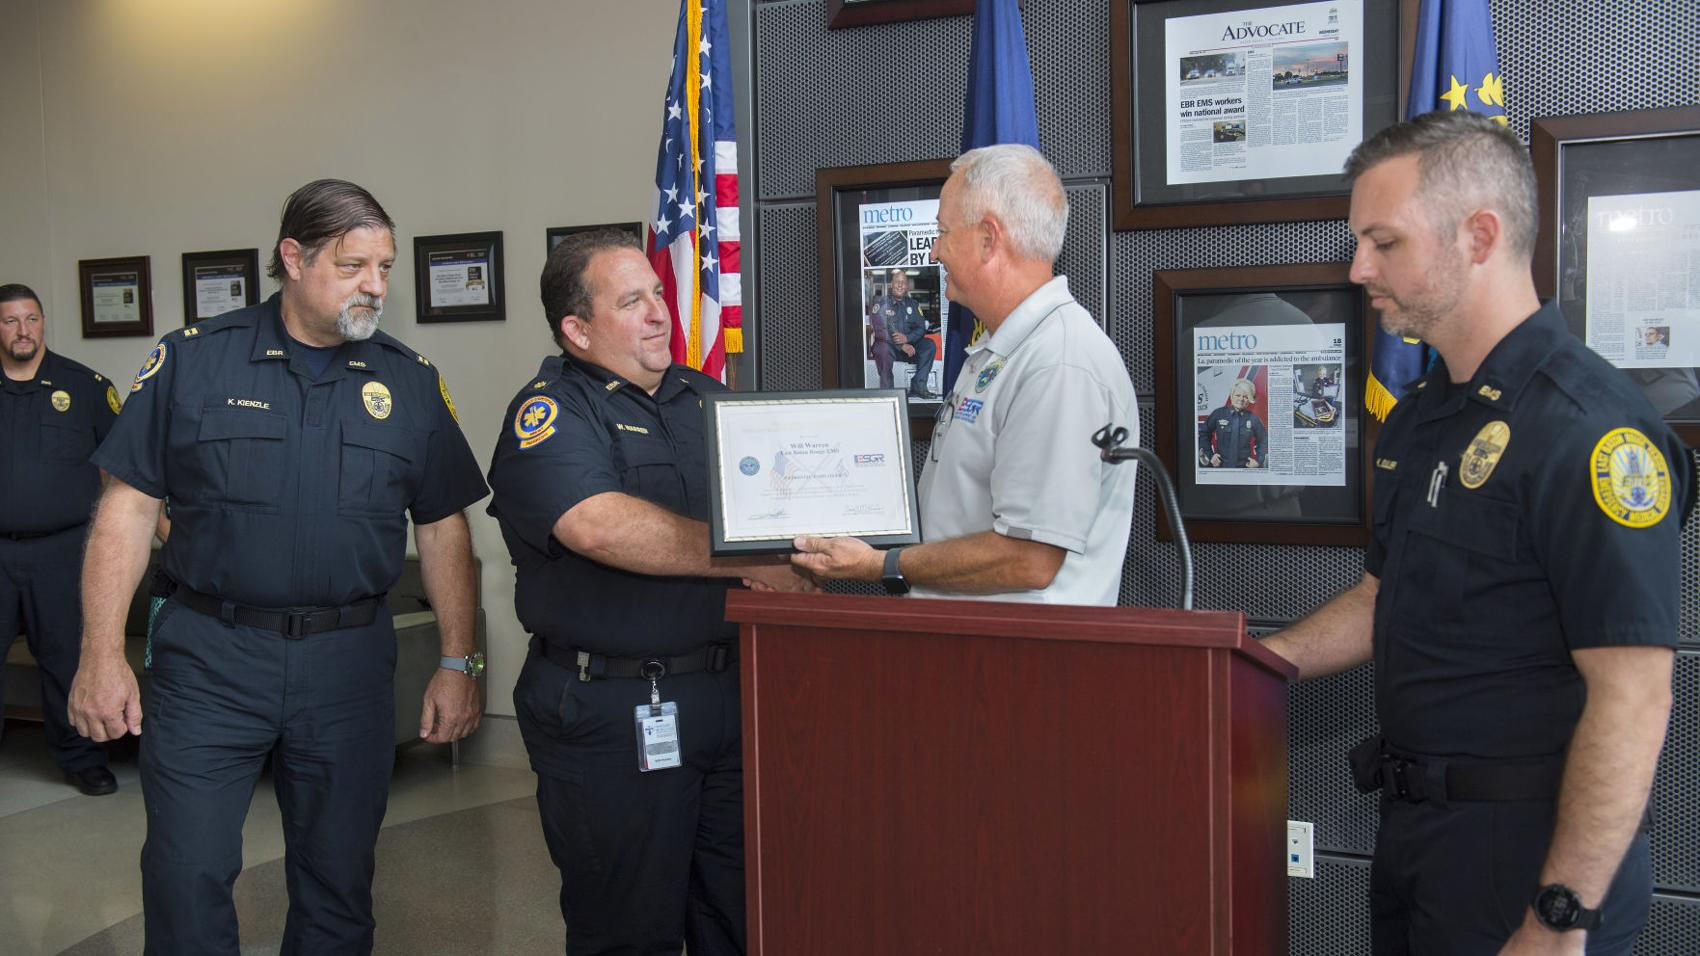 Photos: Two Baton Rouge EMS supervisors get 'Patriotic Employer' awards, for support of paramedic who also serves in La. Army National Guard